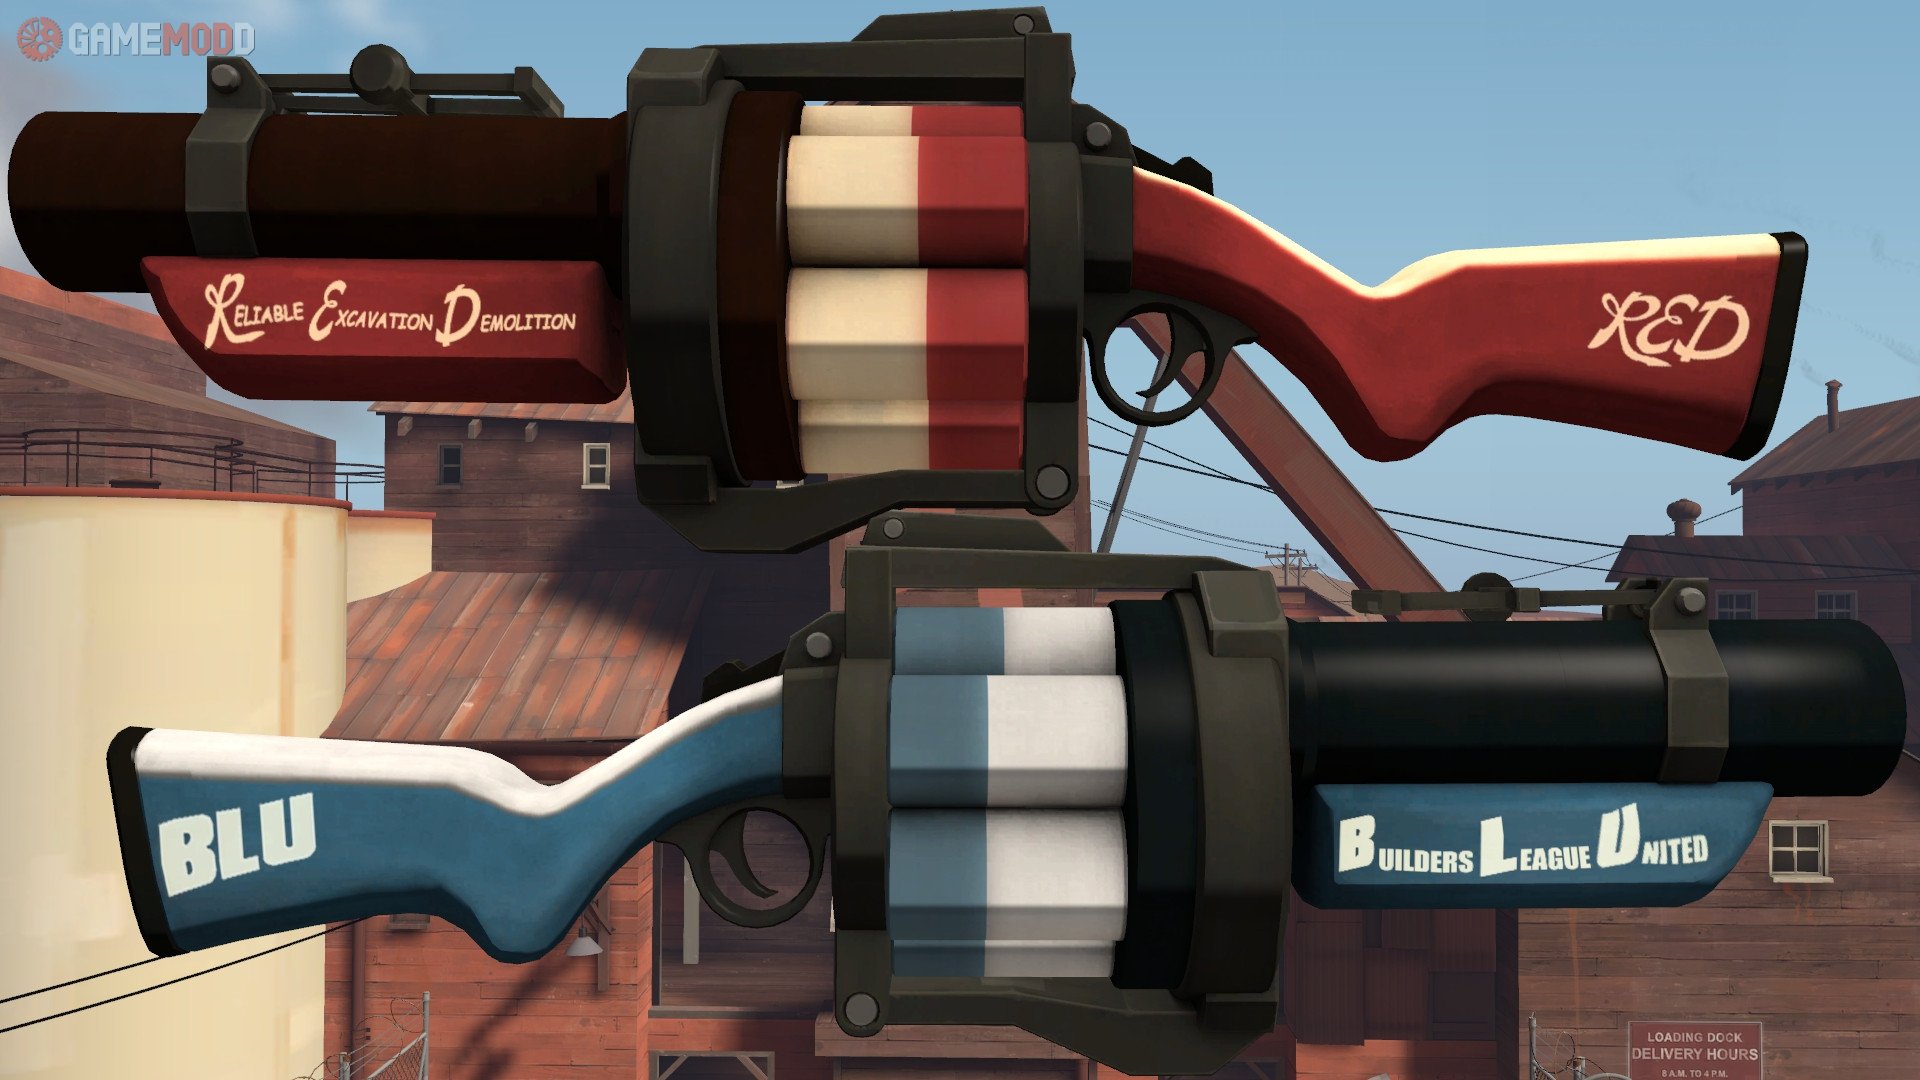 Team launcher. Гранатомет tf2. Team Fortress 2 ракетница. Tf2 Grenade Launcher. Гранатомет тим фортресс.